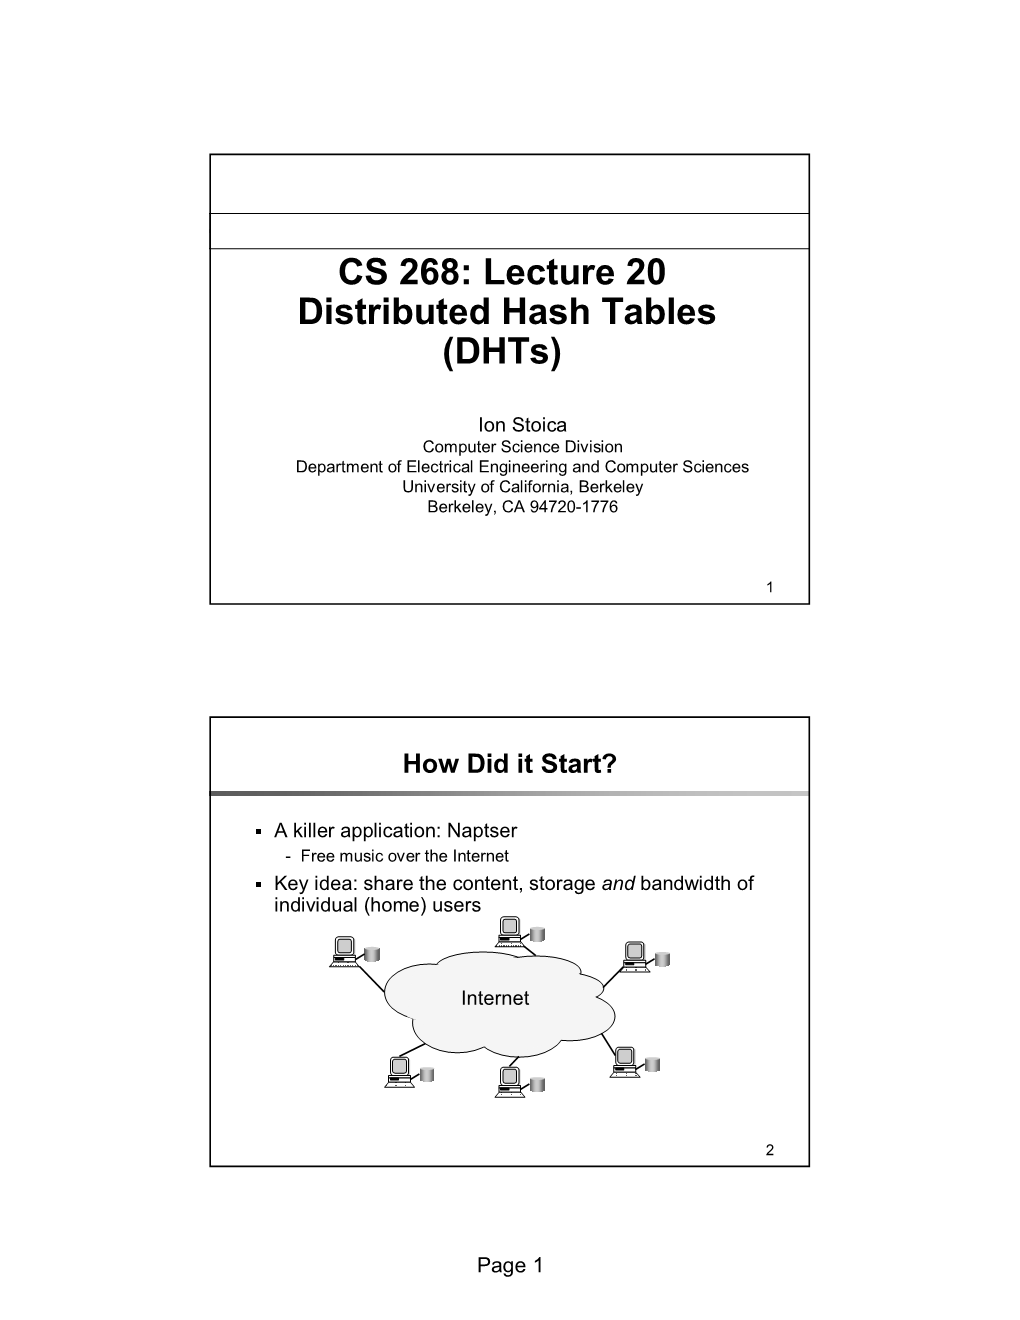 CS 268: Lecture 20 Distributed Hash Tables (Dhts)